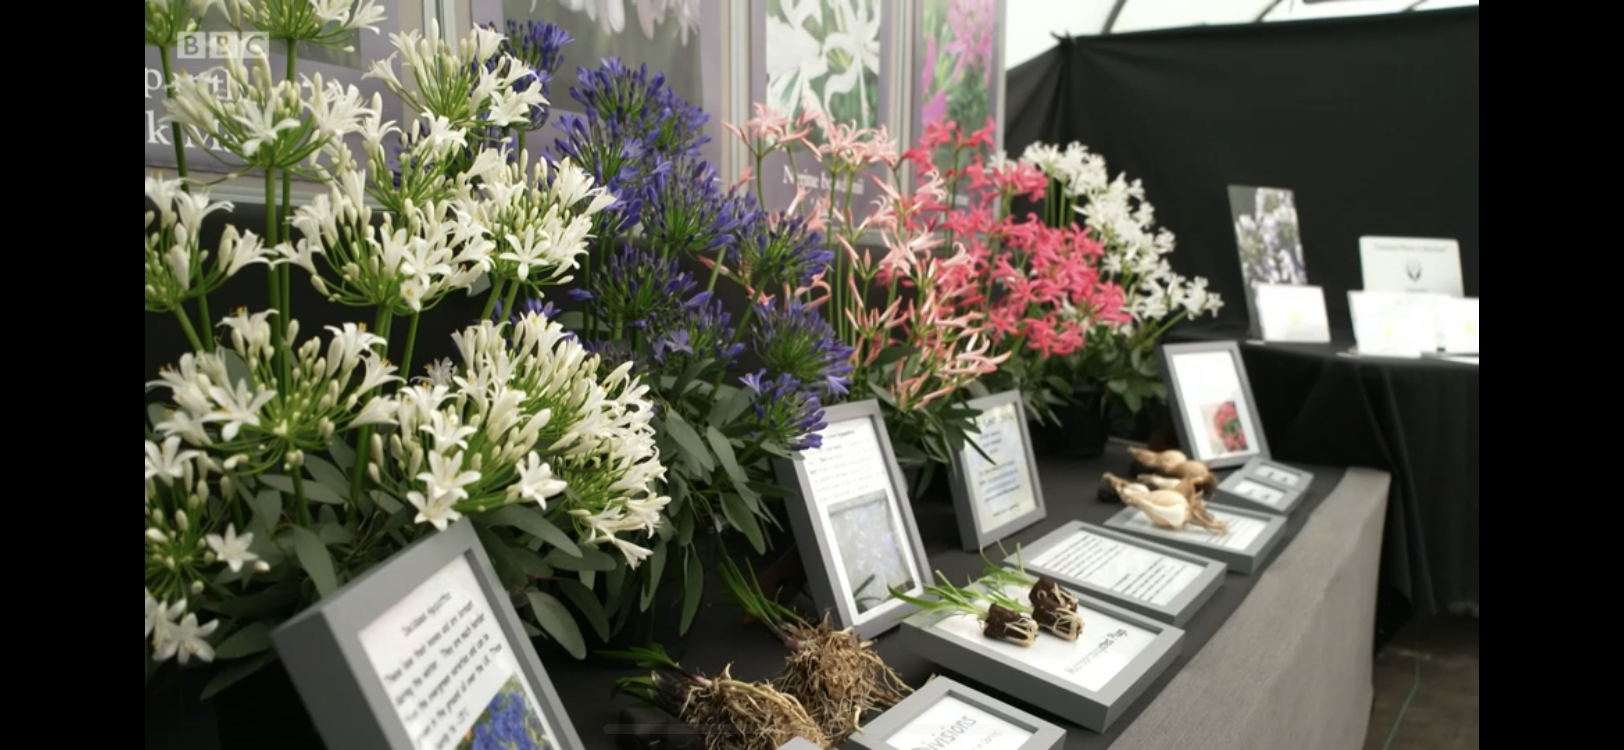 Another beautiful and informative display of Nerines and Agapanthus.